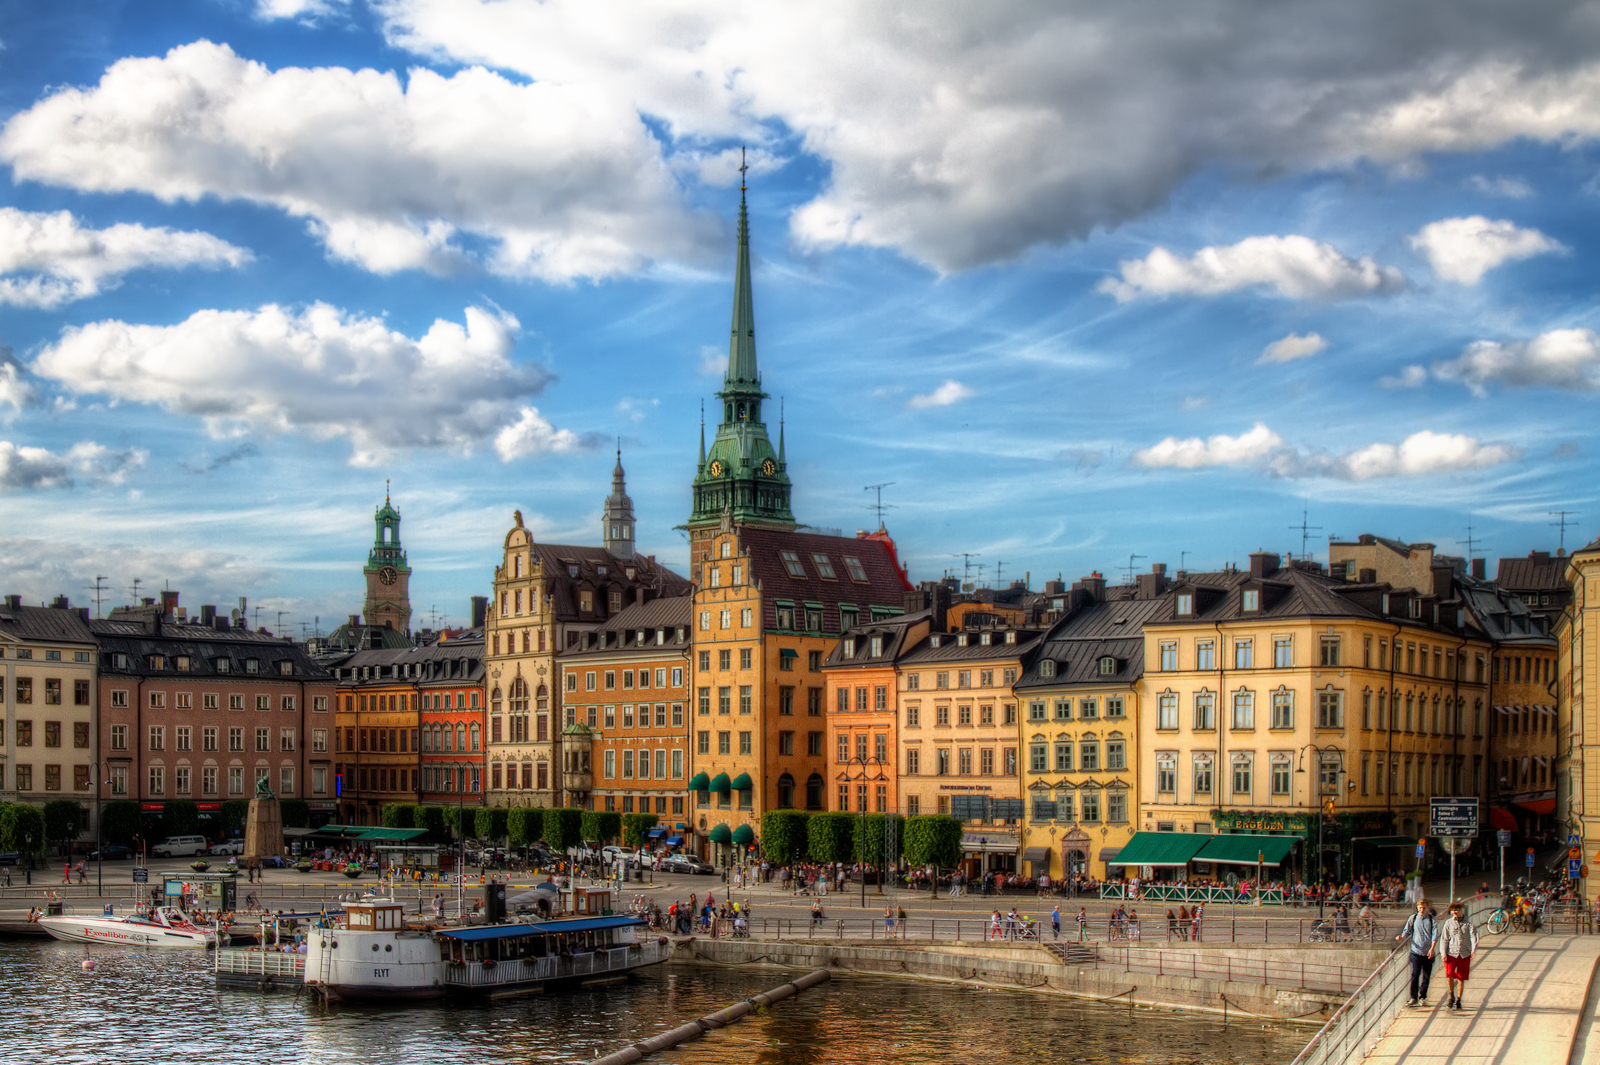 What is Sweden famous for?